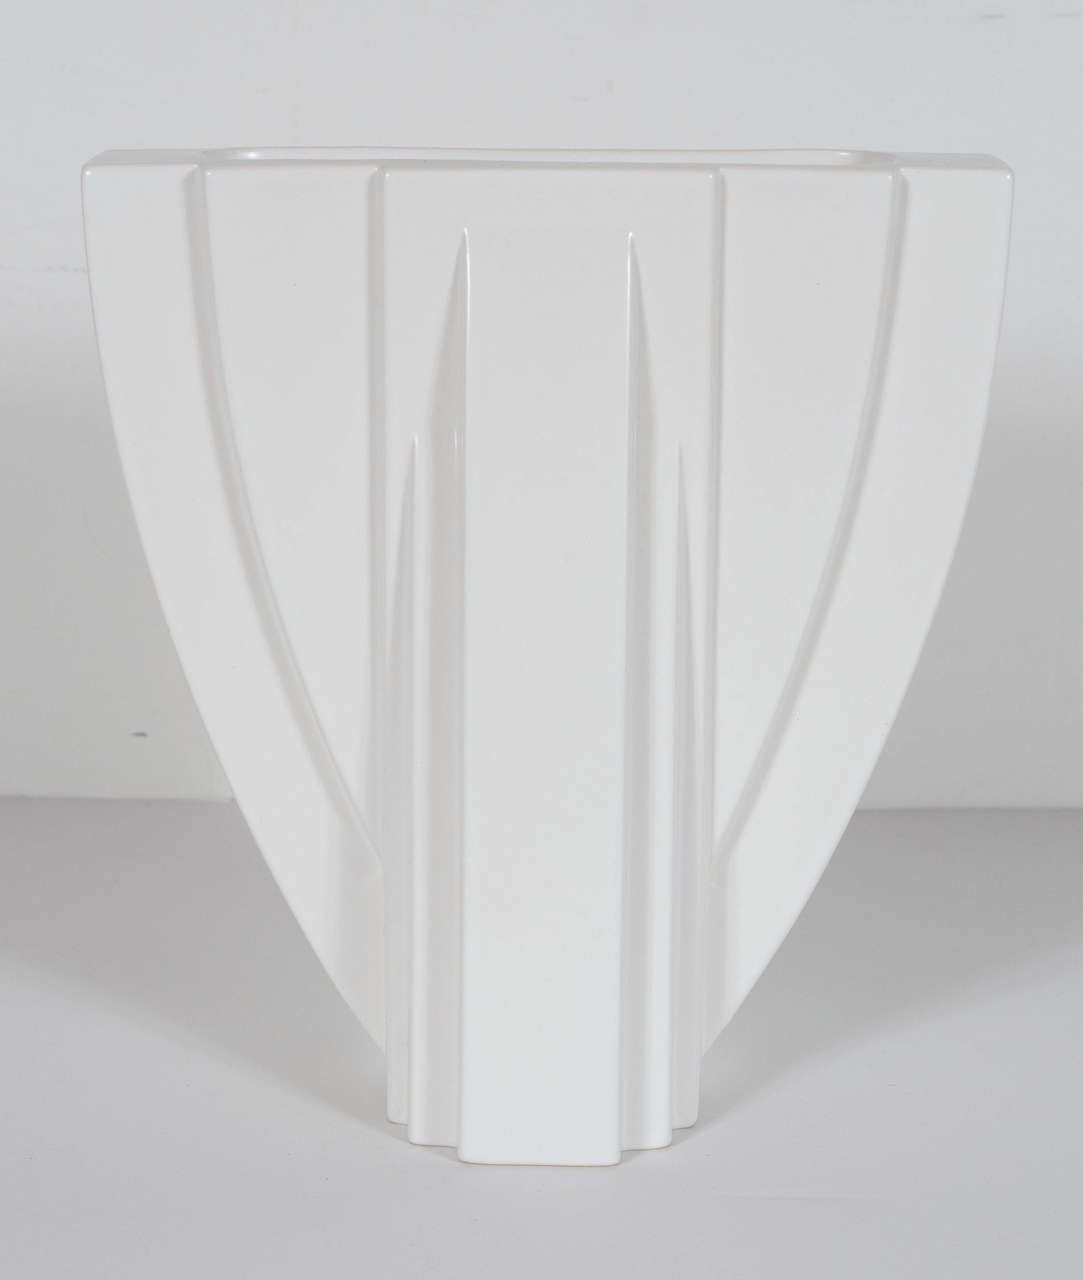 This vase features a reverse arch form with flattened sides molded with geometric and curved extensions in relief, matte crème glaze, raised maker's marks on base. Great skyscraper design very exemplary of the Art Deco period. This vase is in mint